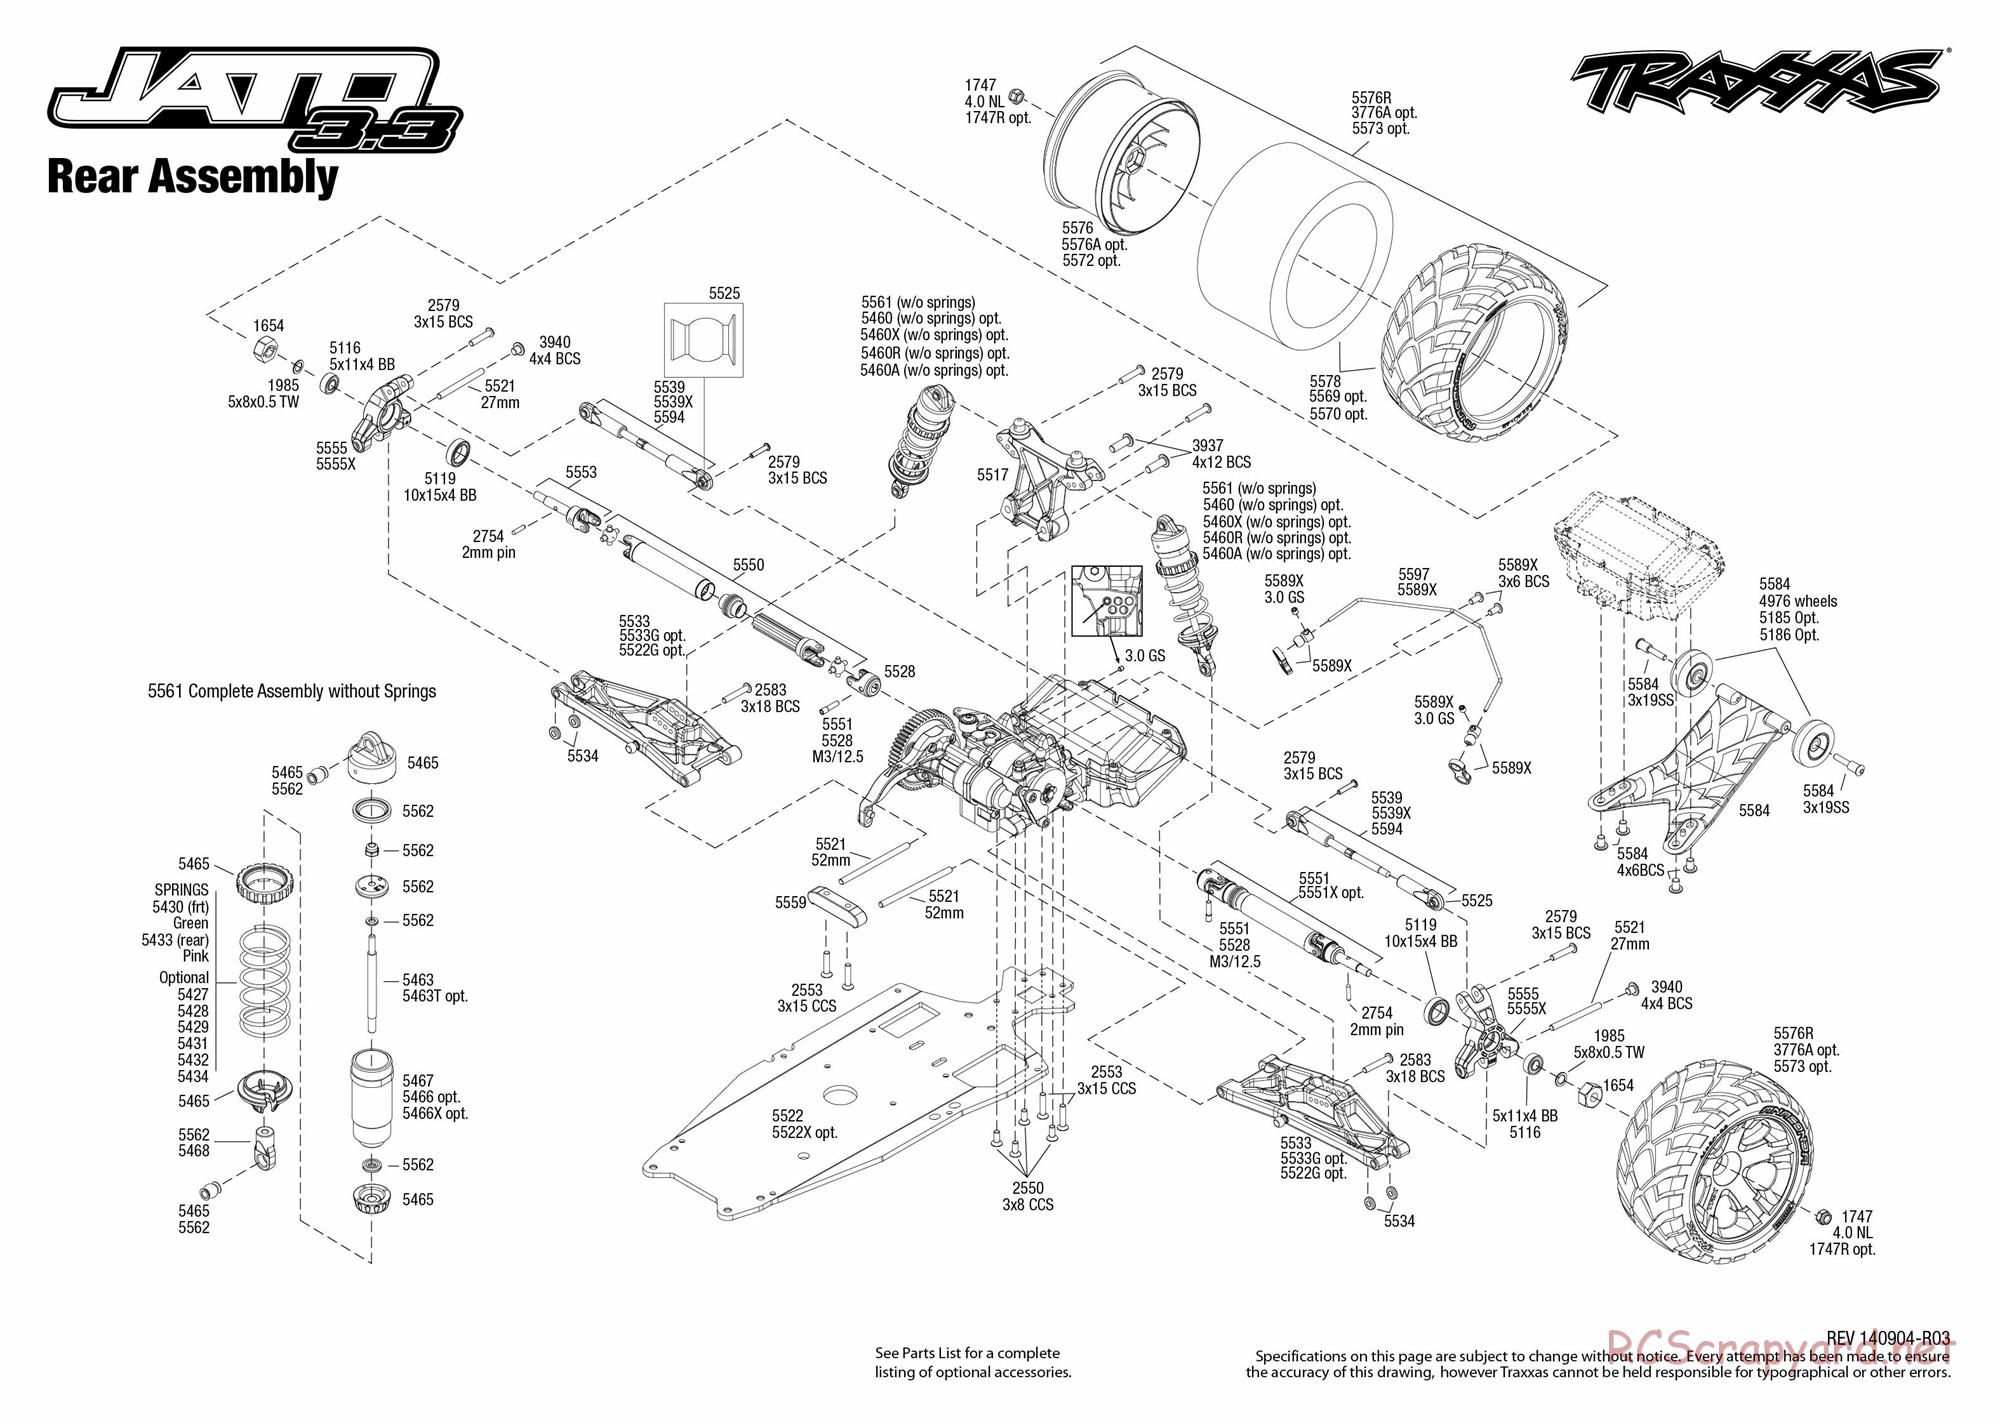 Traxxas - Jato 3.3 (2010) - Exploded Views - Page 4